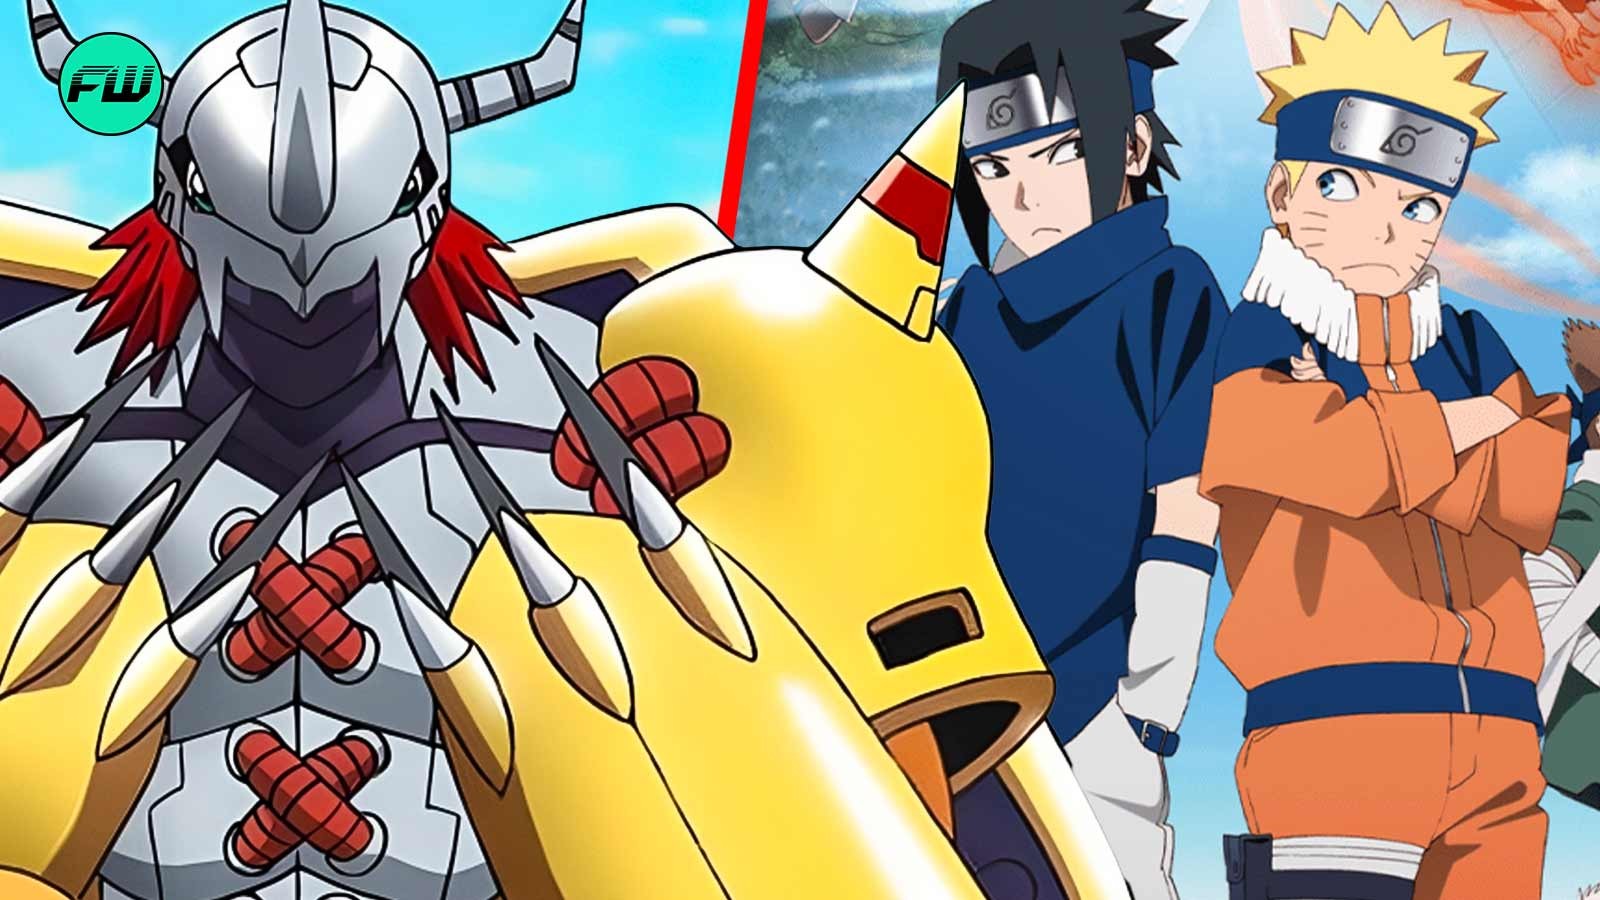 Naruto voice actress Junko Takeuchi’s only condition for returning to Digimon showed how tired she was of playing male characters